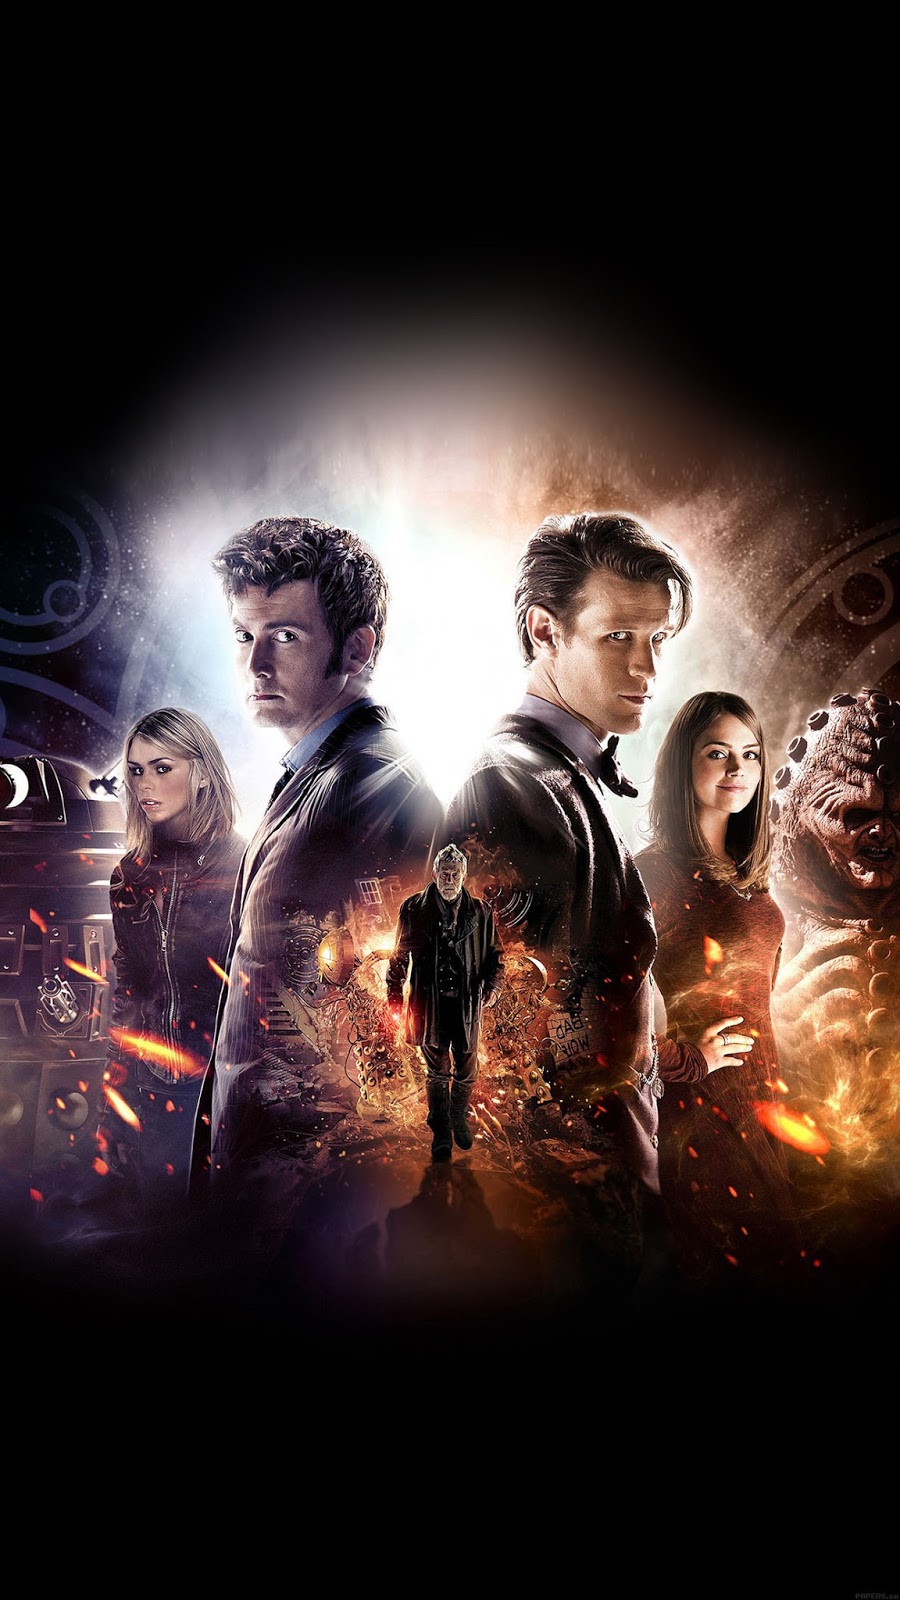 wallpaper-doctor-who-50th-poster-film-face-iphone6-plus-wallpaper.jpg